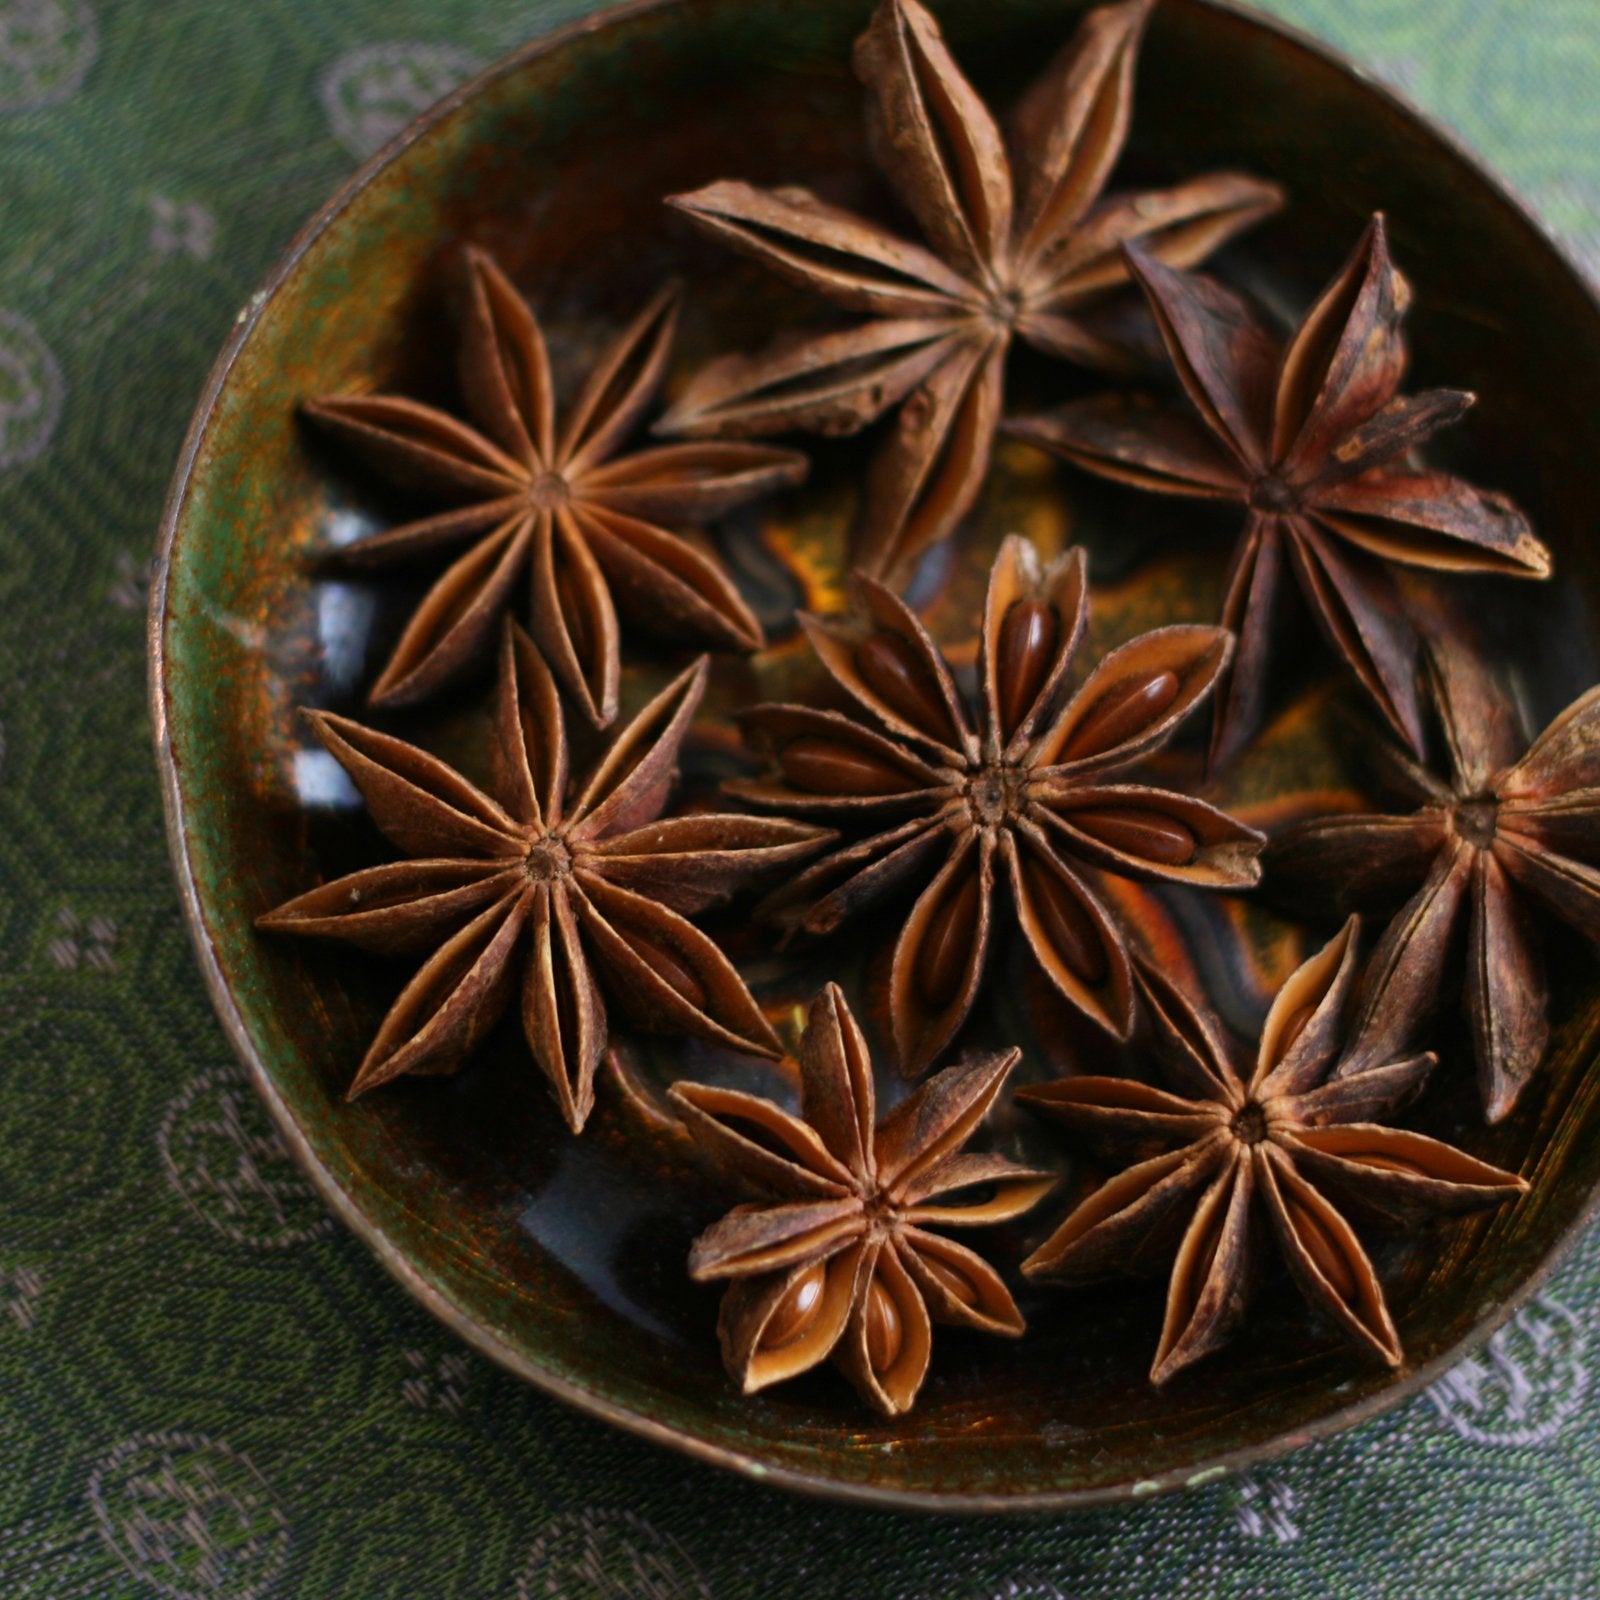 Star Anise (accounts only)